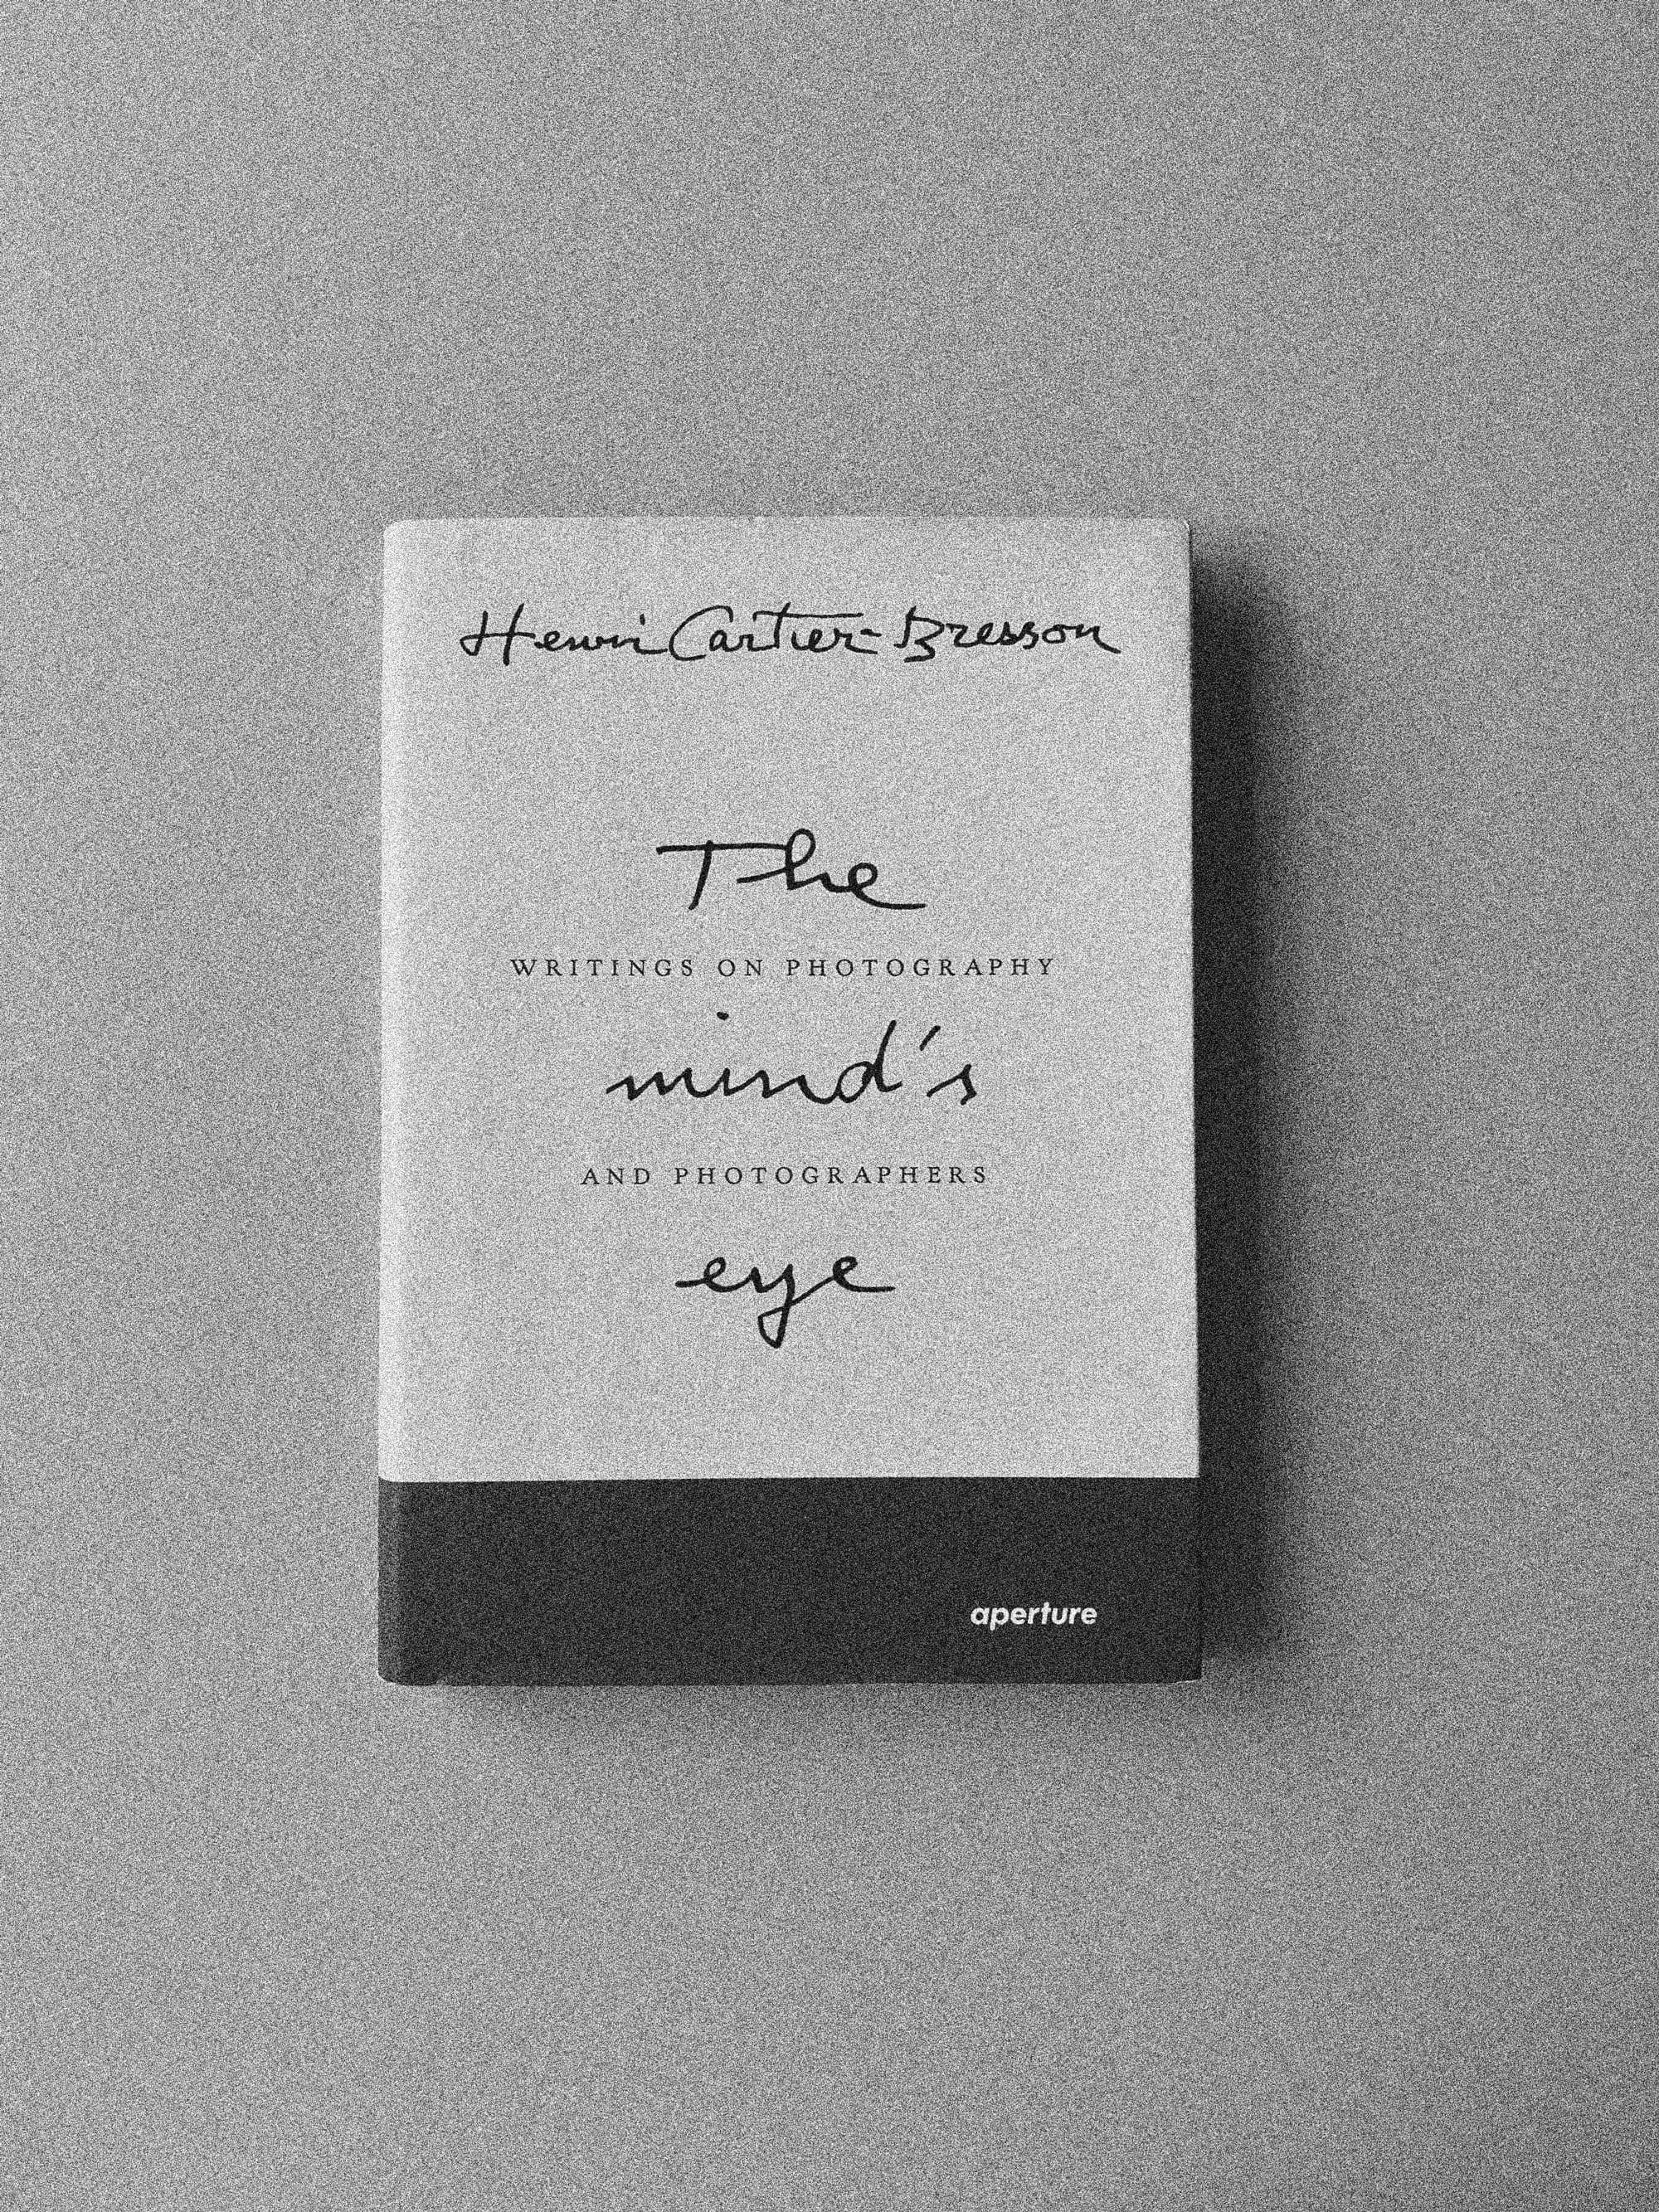 The mind's eye. Writings on Photography and Photographers